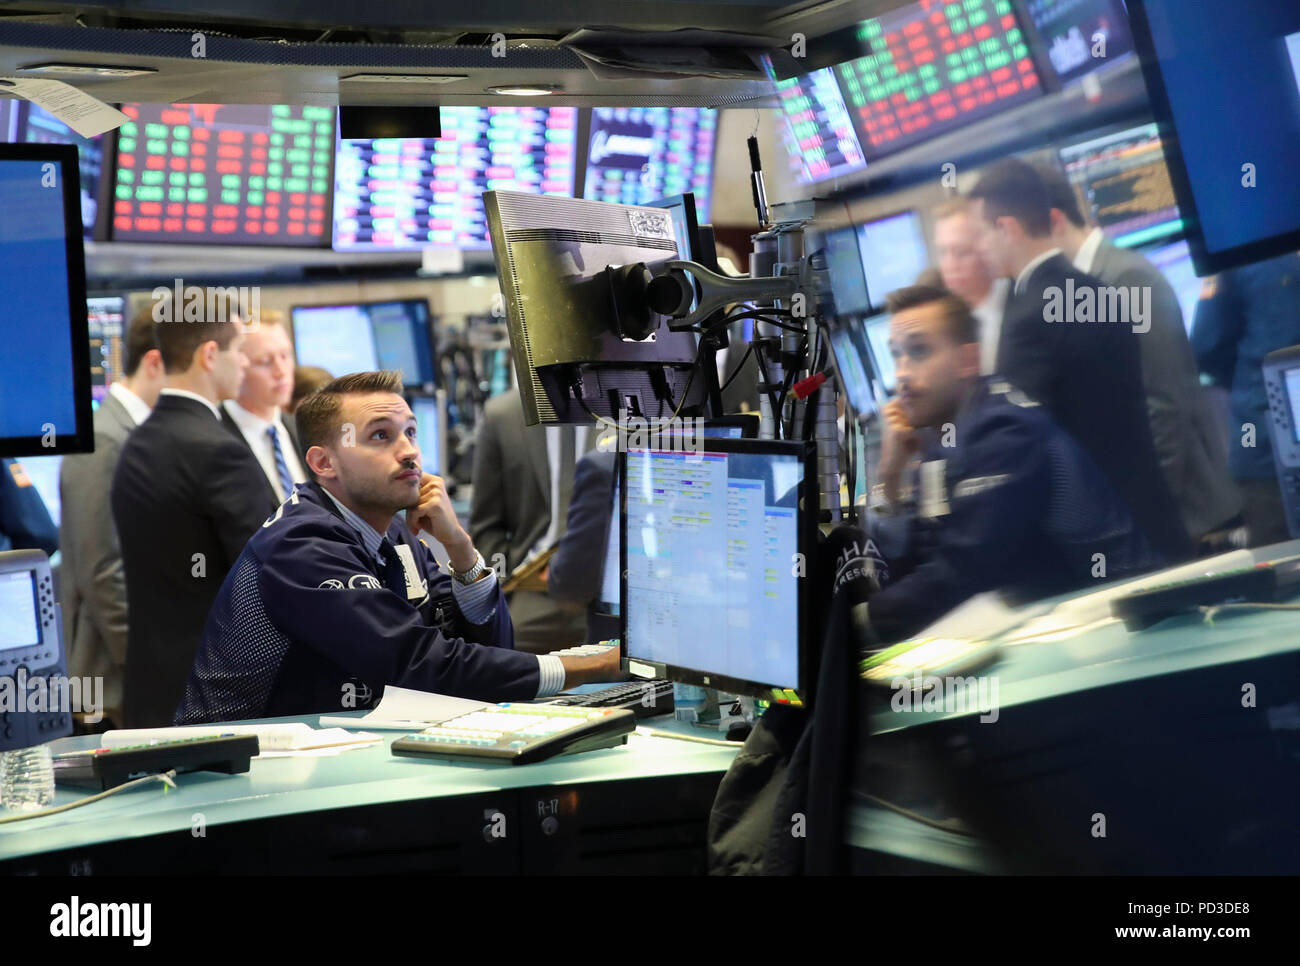 New York, USA. 6th Aug, 2018. Traders work at the New York Stock Exchange in New York, the United States, Aug. 6, 2018. U.S. stocks closed higher on Monday as investors digested a batch of second-quarter corporate earnings reports. The Dow Jones Industrial Average rose 39.60 points, or 0.16 percent, to 25,502.18. The S&P 500 increased 10.05 points, or 0.35 percent, to 2,850.40. The Nasdaq Composite Index rose 47.66 points, or 0.61 percent, to 7,859.68. Credit: Wang Ying/Xinhua/Alamy Live News Stock Photo